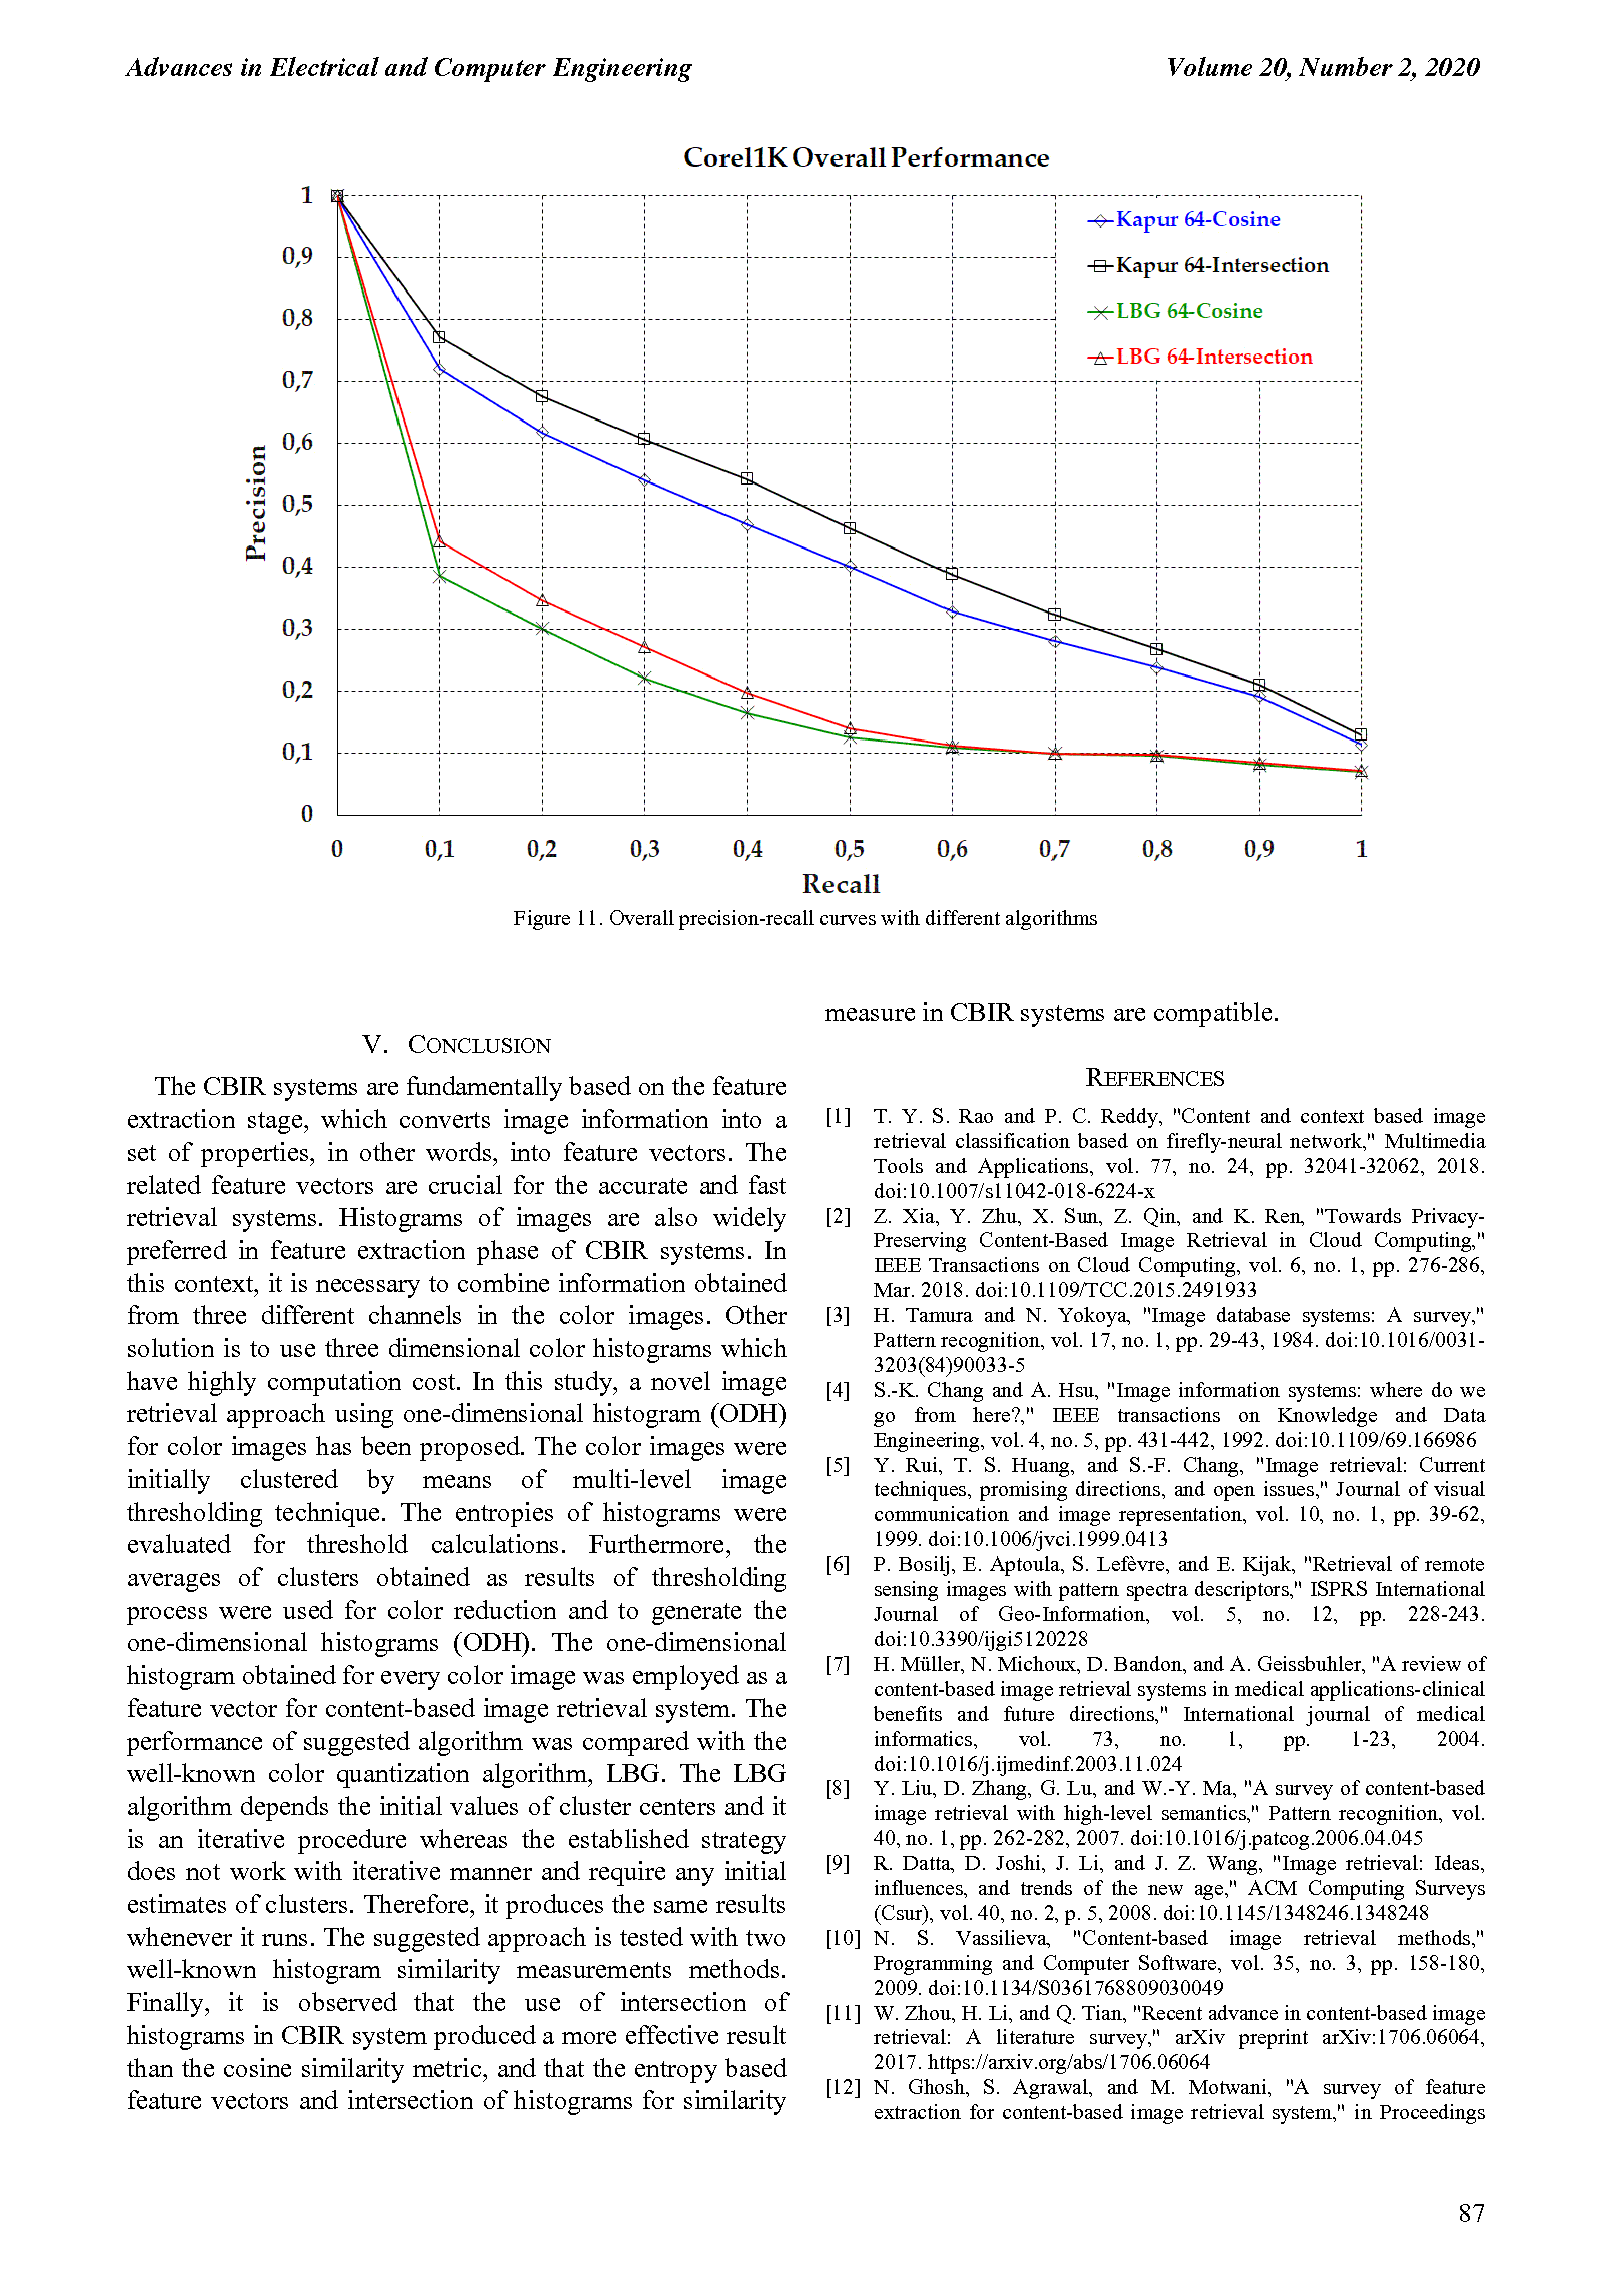 PDF Quickview for paper with DOI:10.4316/AECE.2020.02010